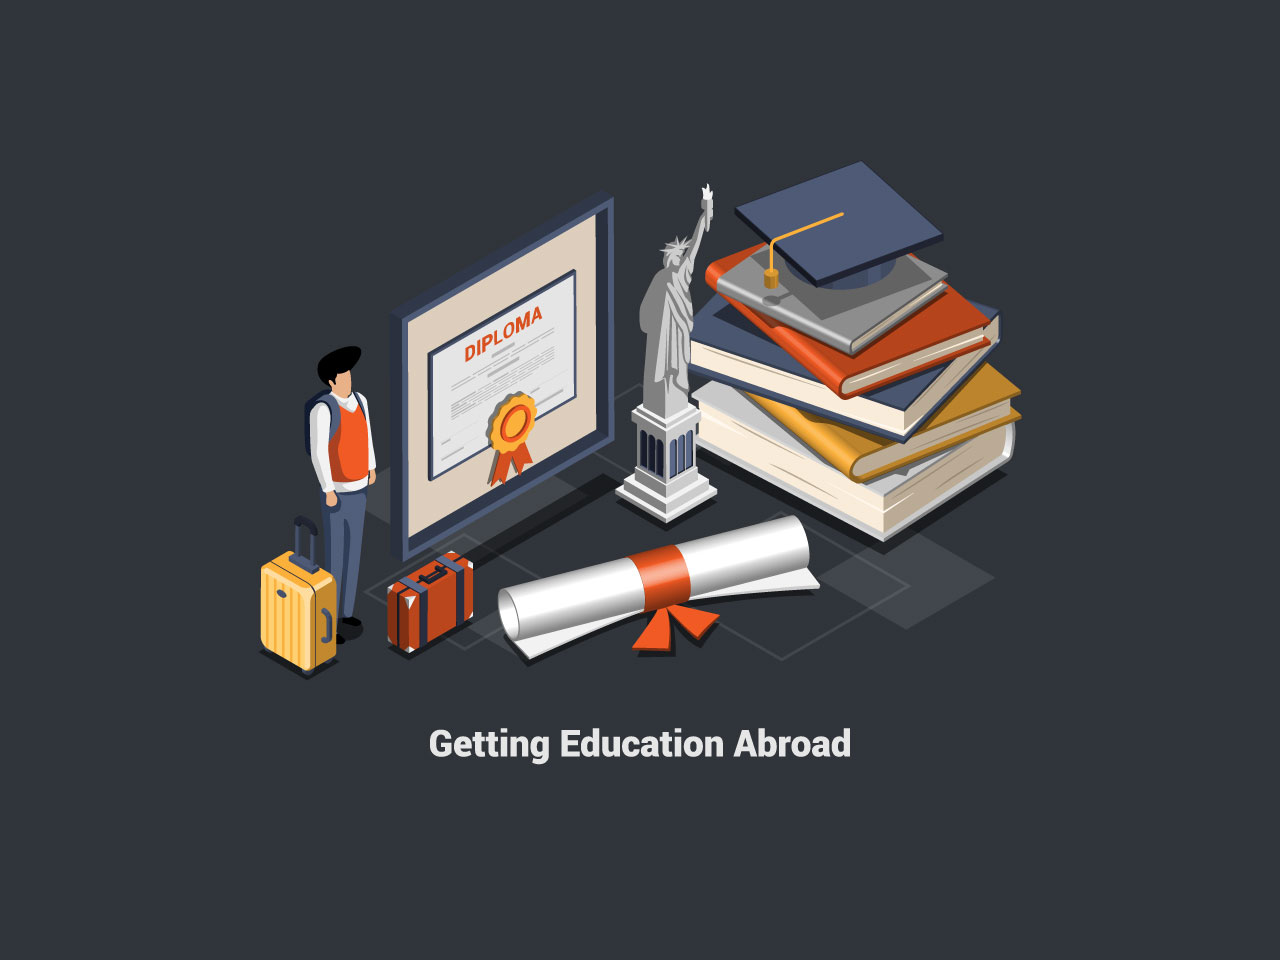 Elearning education abroad program boy student with luggage near huge diploma frame going language tour learning languages exchange student program cartoon isometric 3d illustration